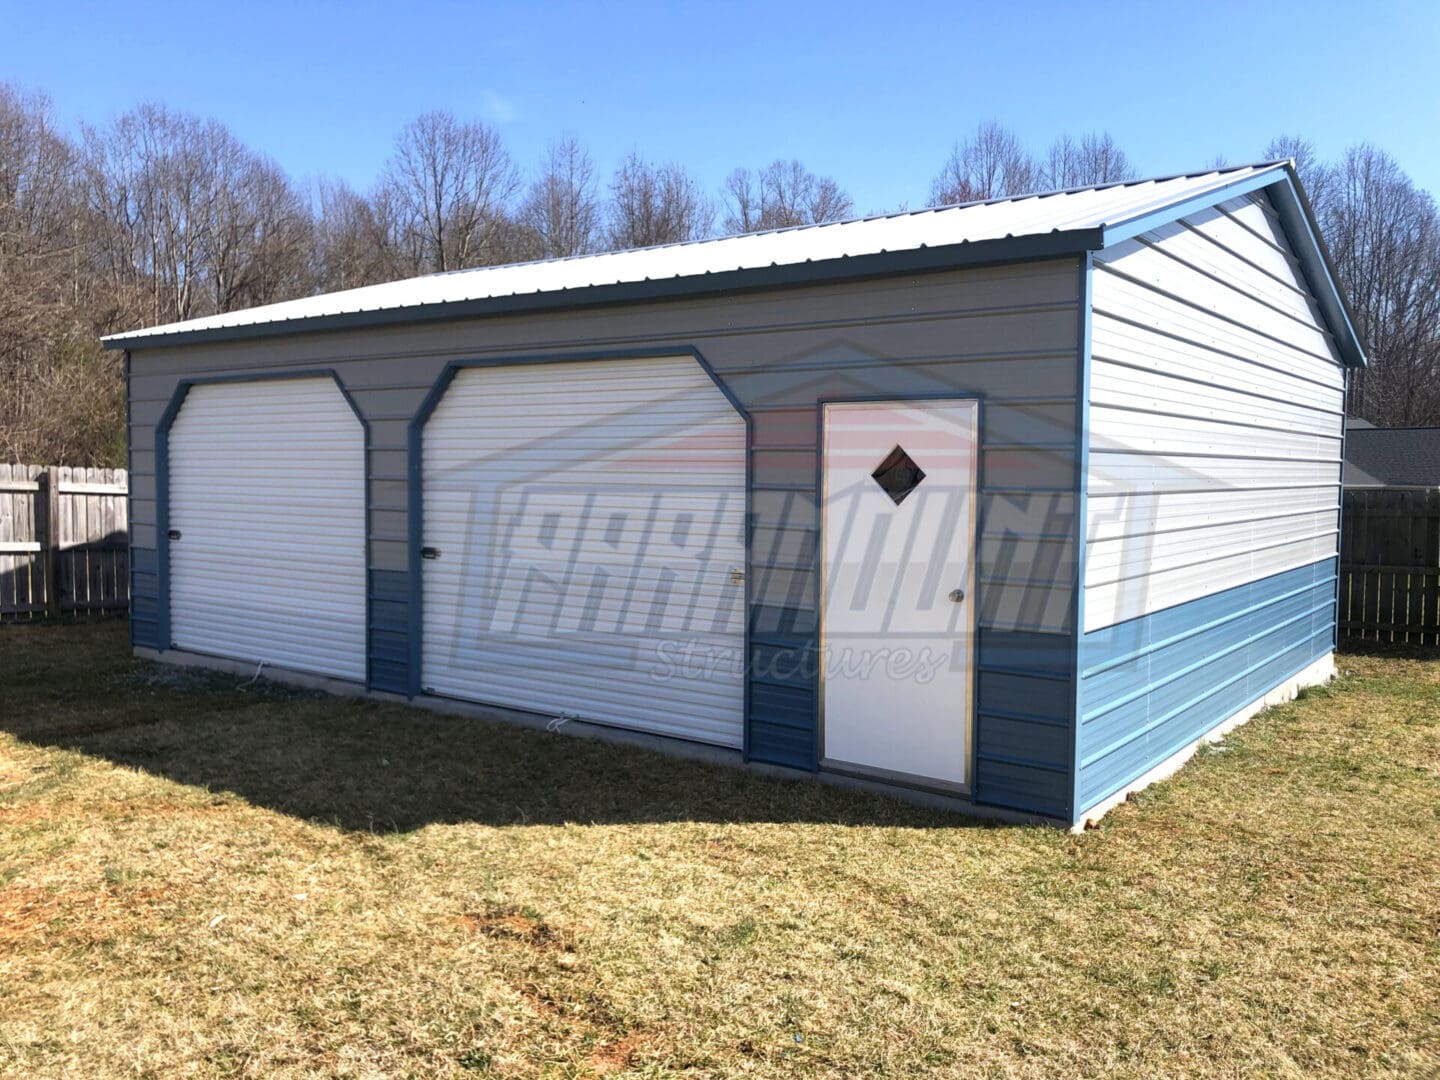 A blue and white garage with two doors.